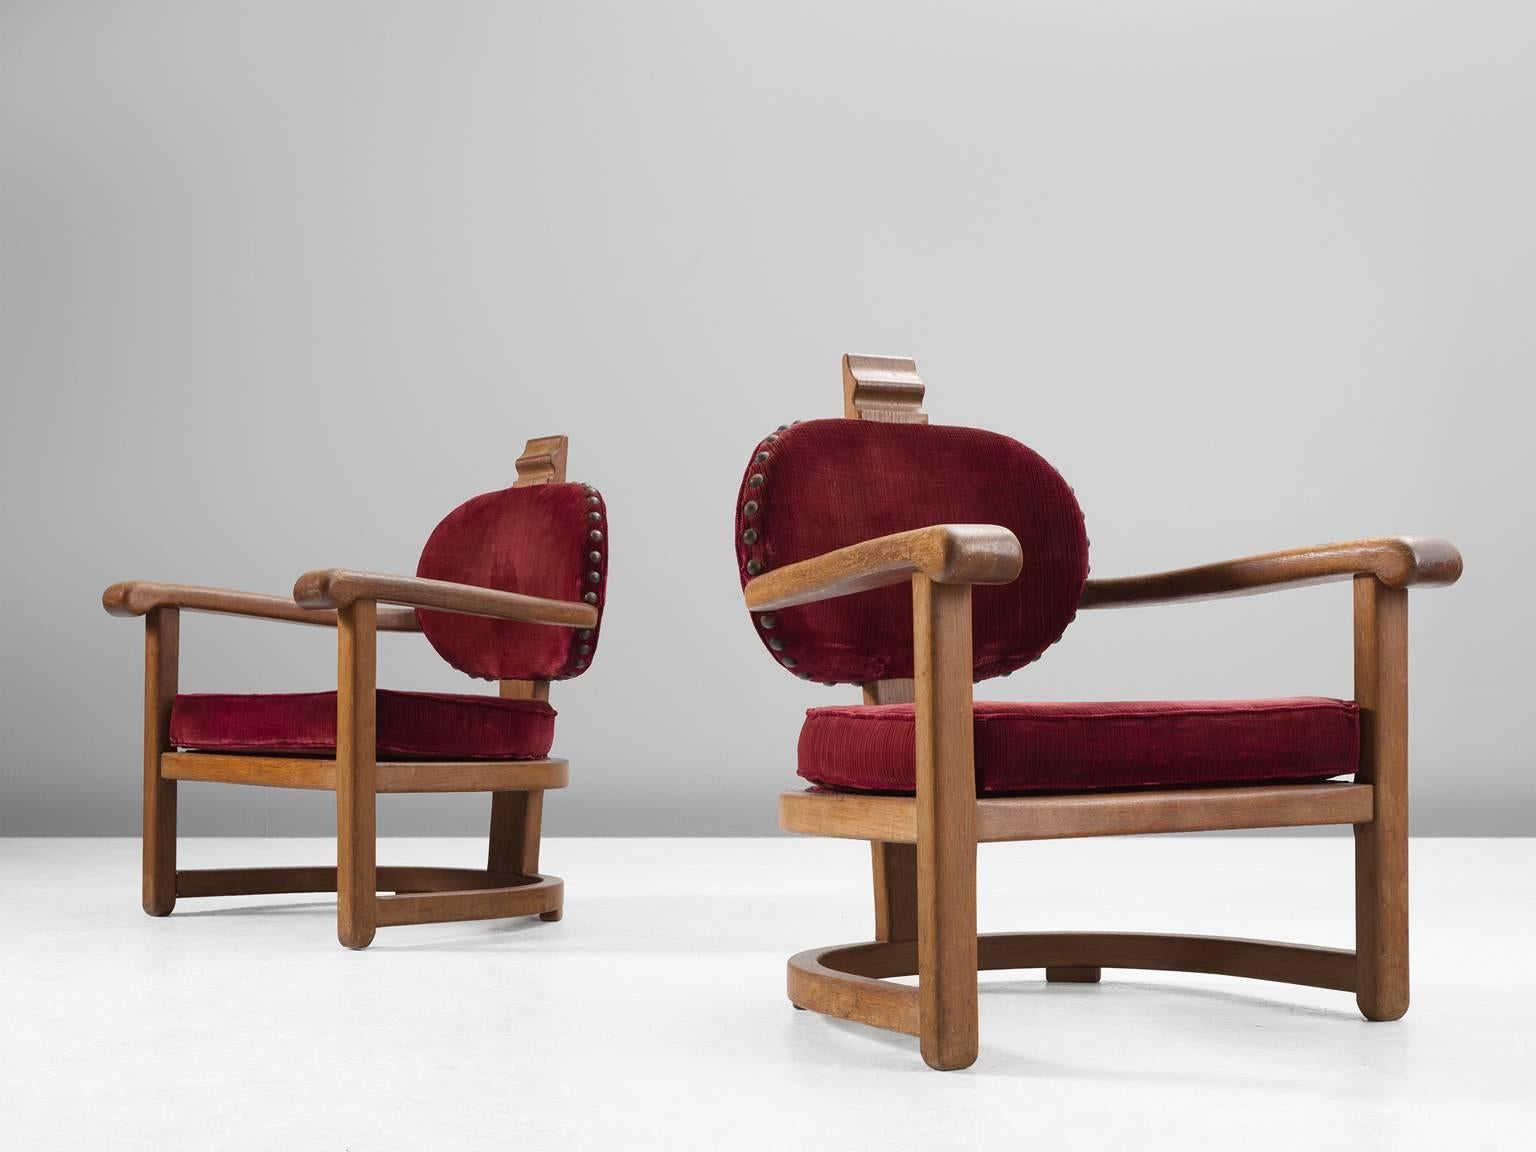 Set of two armchairs, in oak and fabric, Europe, 1930s. 

A pair of stately Art Deco club chairs with a solid oak frame and red velours fabric upholstery. These grand and solid chairs are almost architectural in the sense that they are strong enough